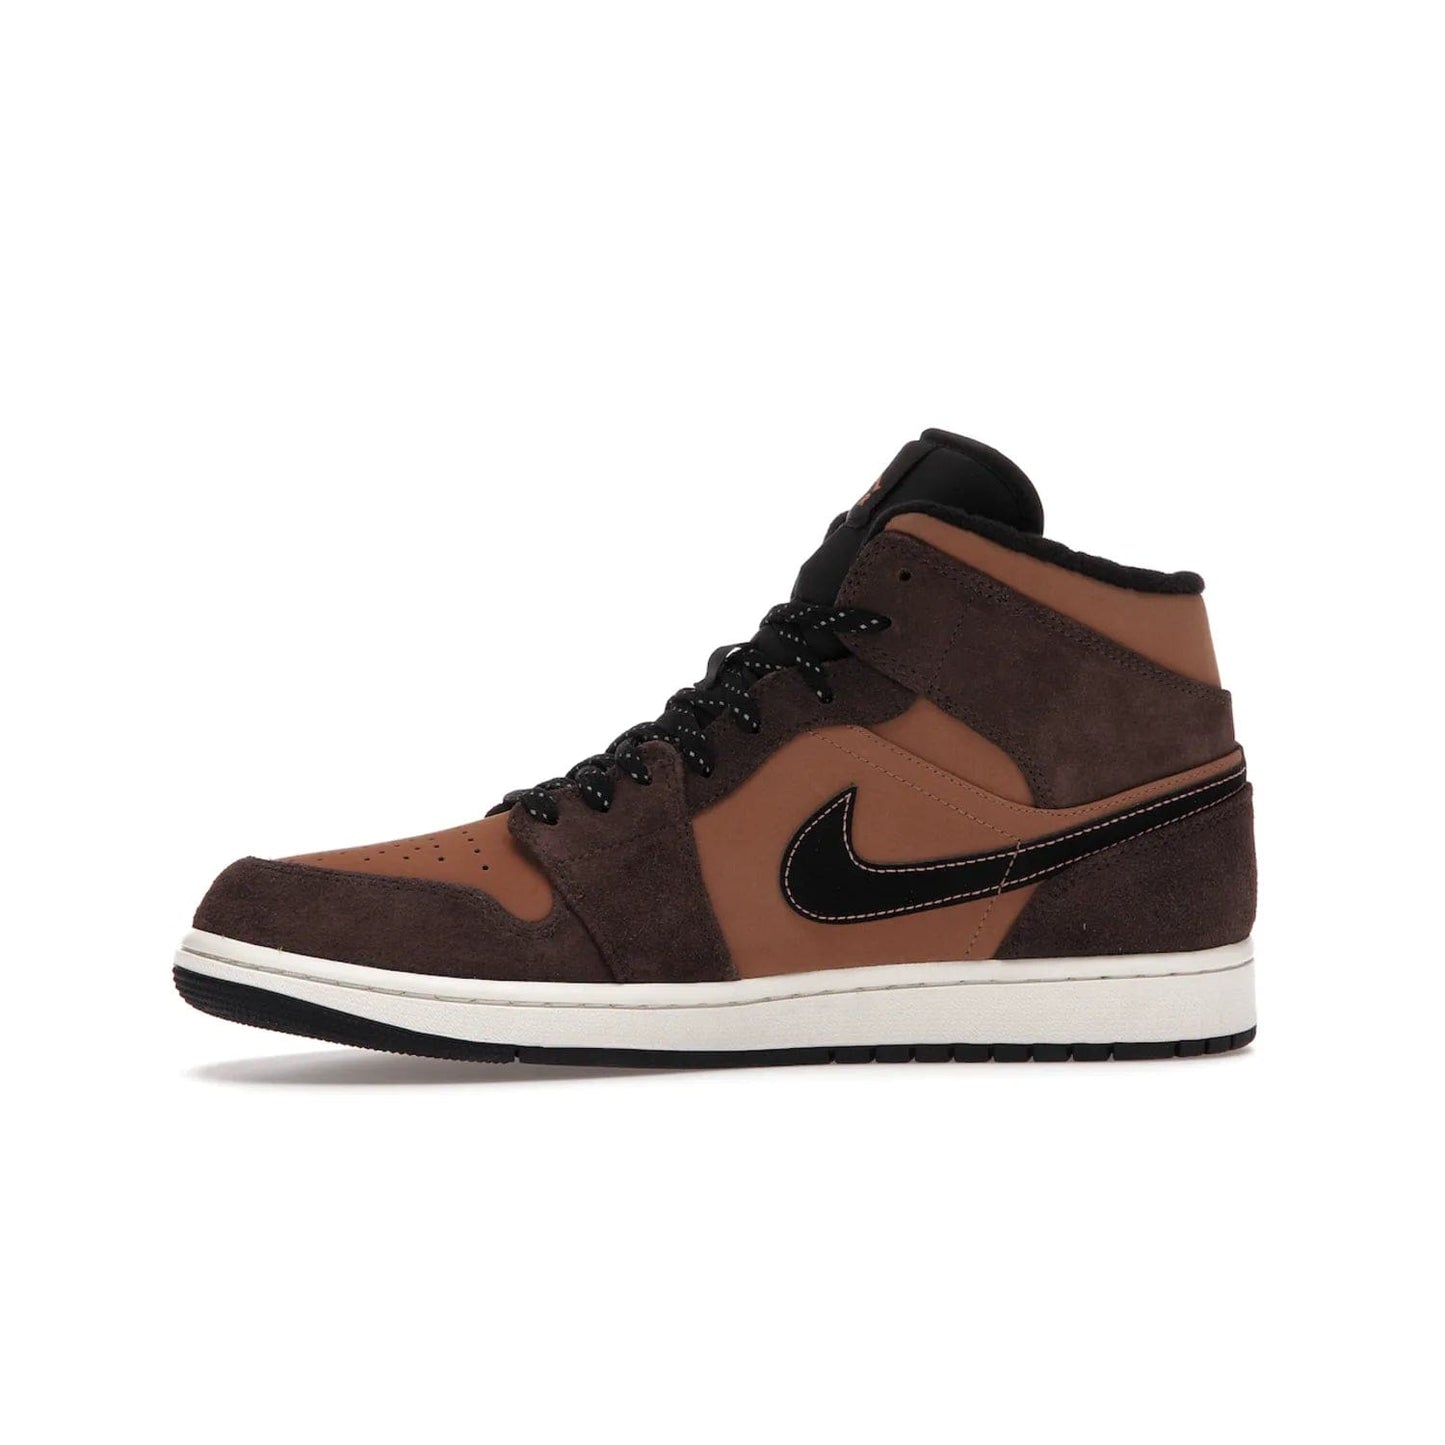 Jordan 1 Mid SE Dark Chocolate - Image 18 - Only at www.BallersClubKickz.com - This fashionable and functional Jordan 1 Mid SE Dark Chocolate features a light brown Durabuck upper, dark brown suede overlays, black Swoosh logos and reflective patch at heel. A must-have for any sneakerhead!